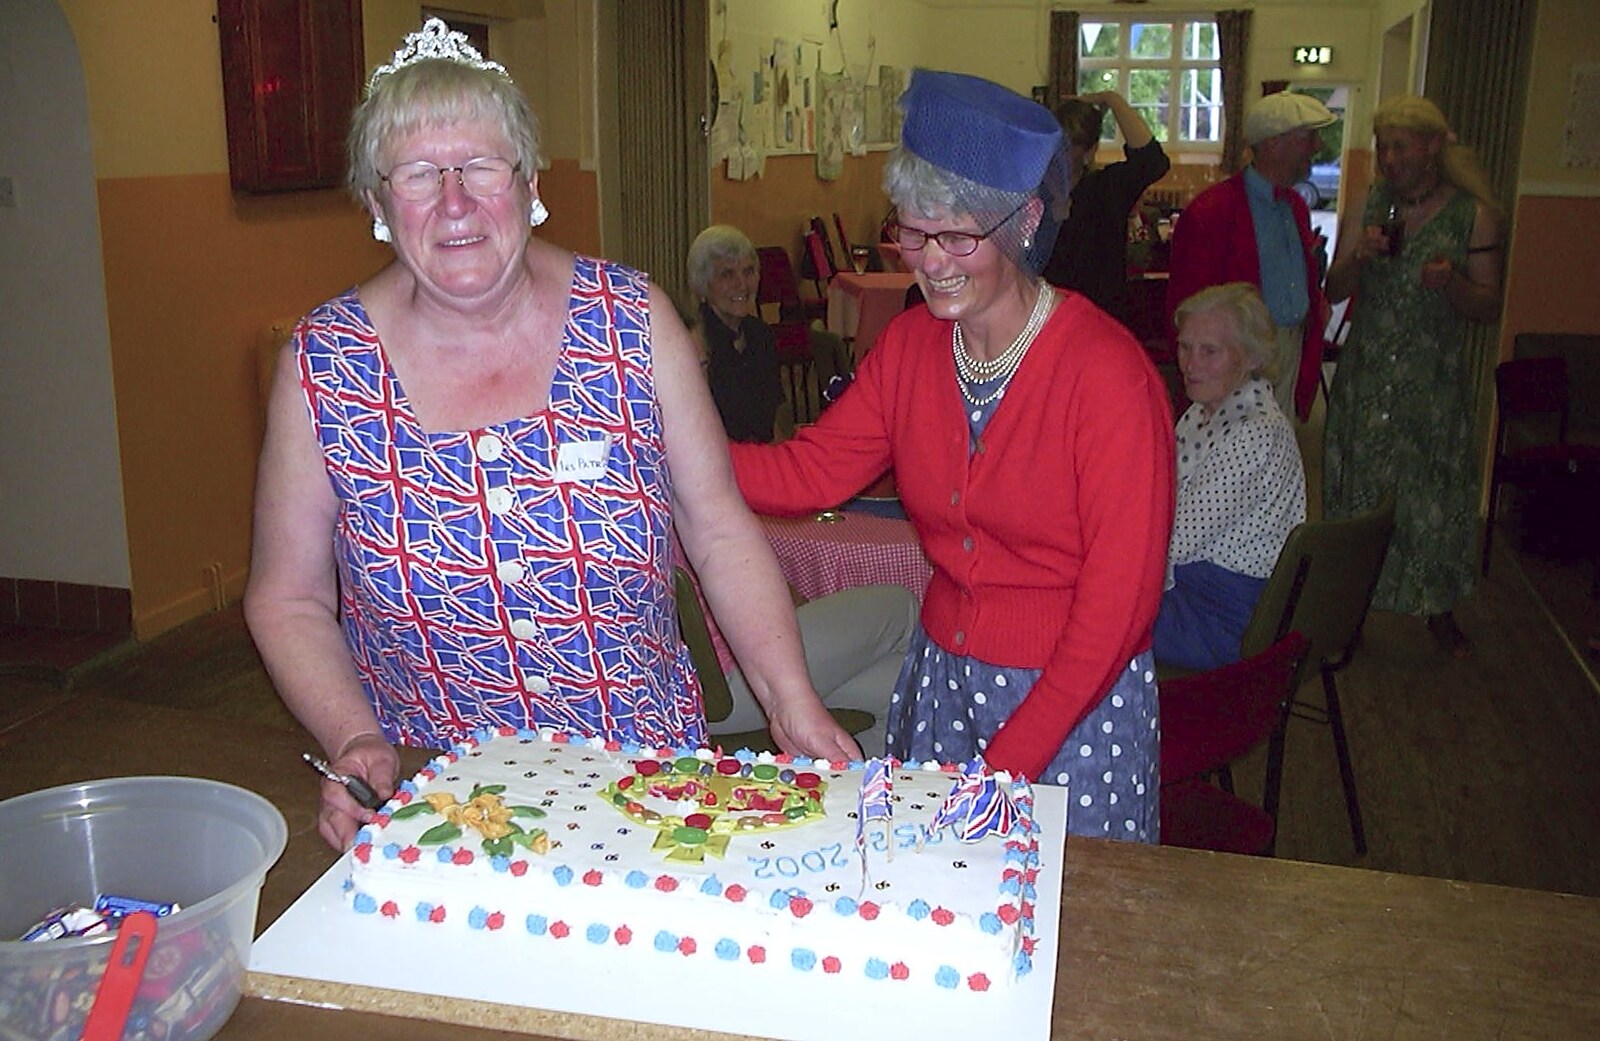 The cake is cut from Golden Jubilee Celebrations, The Village Hall, Brome, Suffolk - 4th June 2002